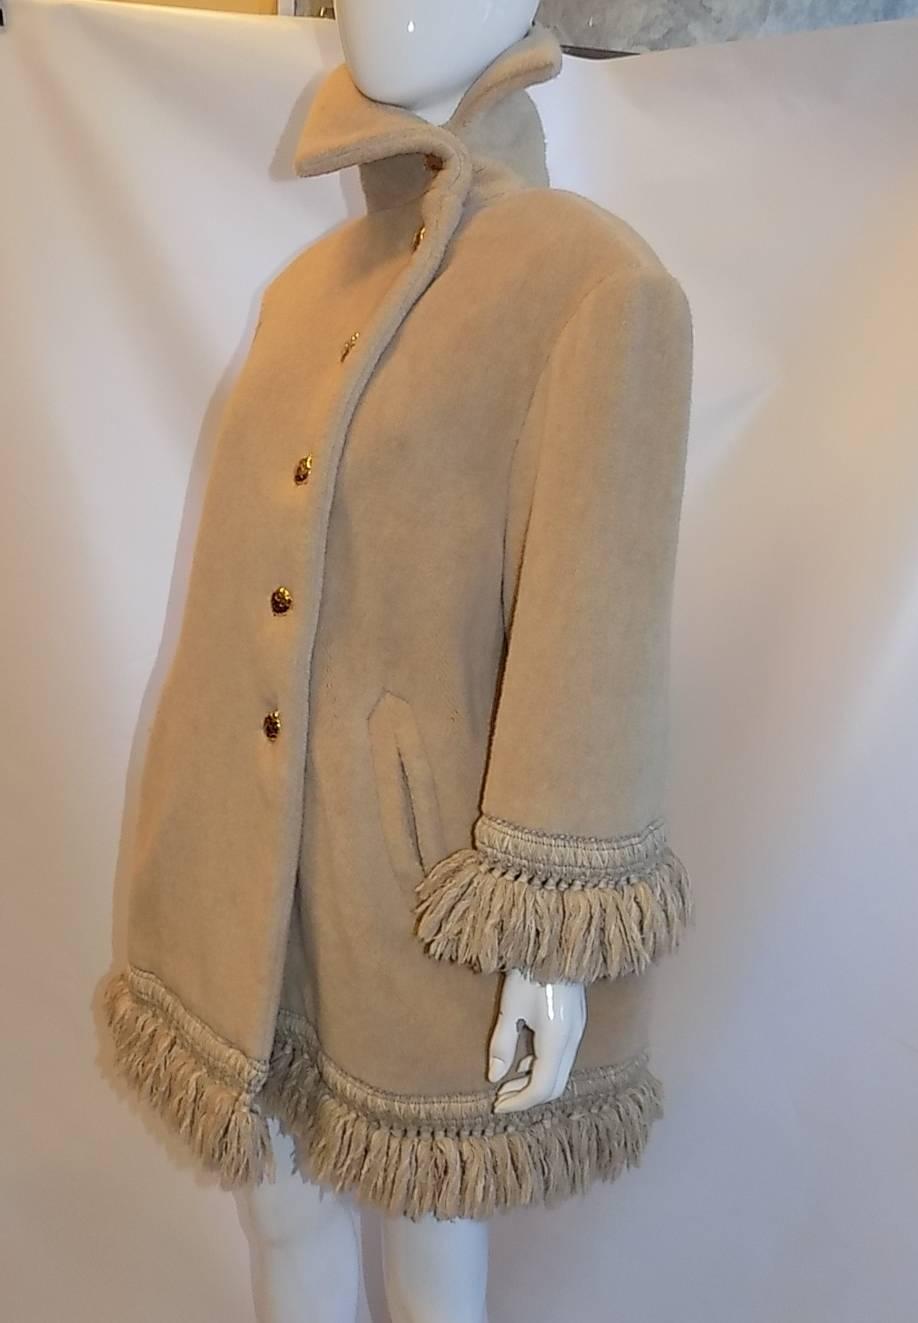 Beautiful cafe au lait  color wool coat by Valentino. Resembling sheared fur with hand crochet fringed trim.  Side button closure with fabulous turtle buttons. High collar, wide sleeves, side pockets. Fully lined. Pristine condition like new.